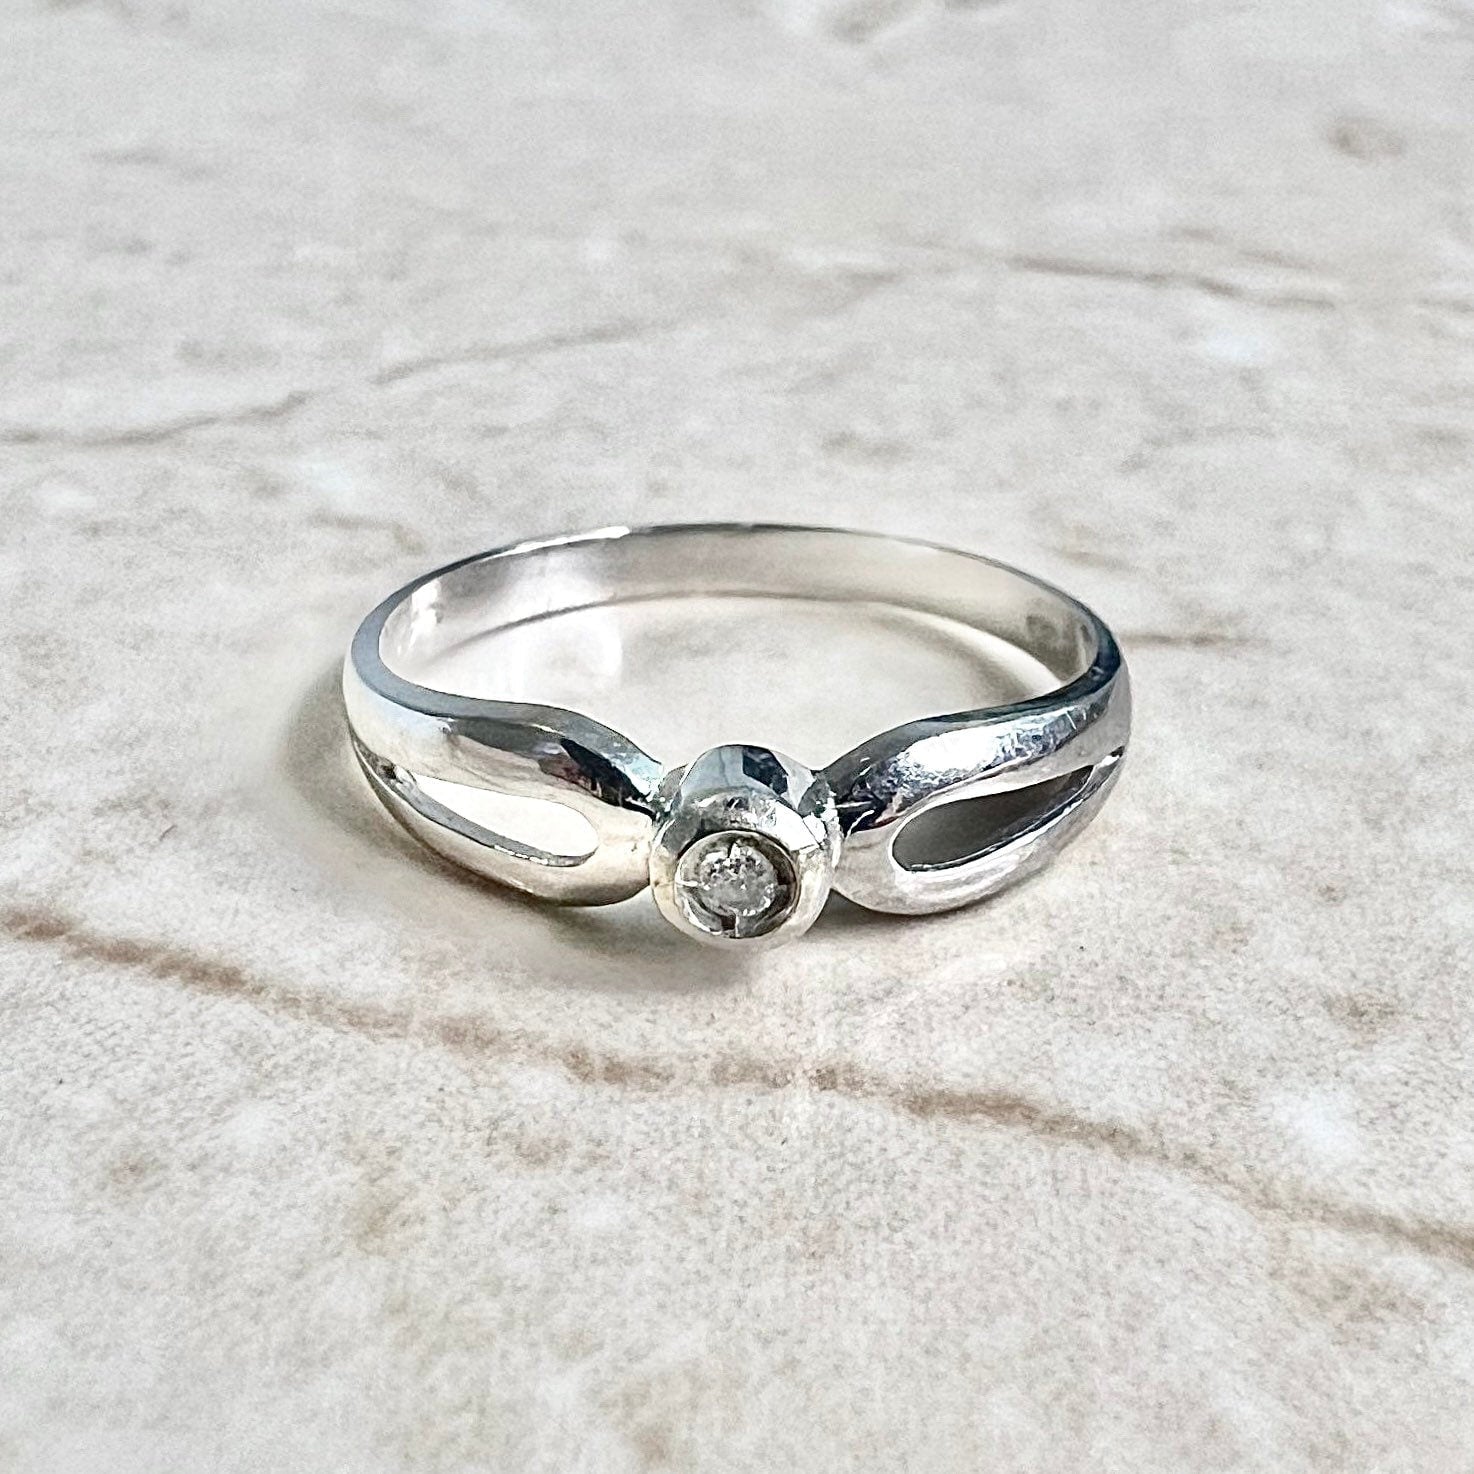 Vintage Italian 18K Diamond Engagement Ring - White Gold Diamond Solitaire Ring - Promise Ring - Wedding Ring -Valentine’s Day Gifts For Her